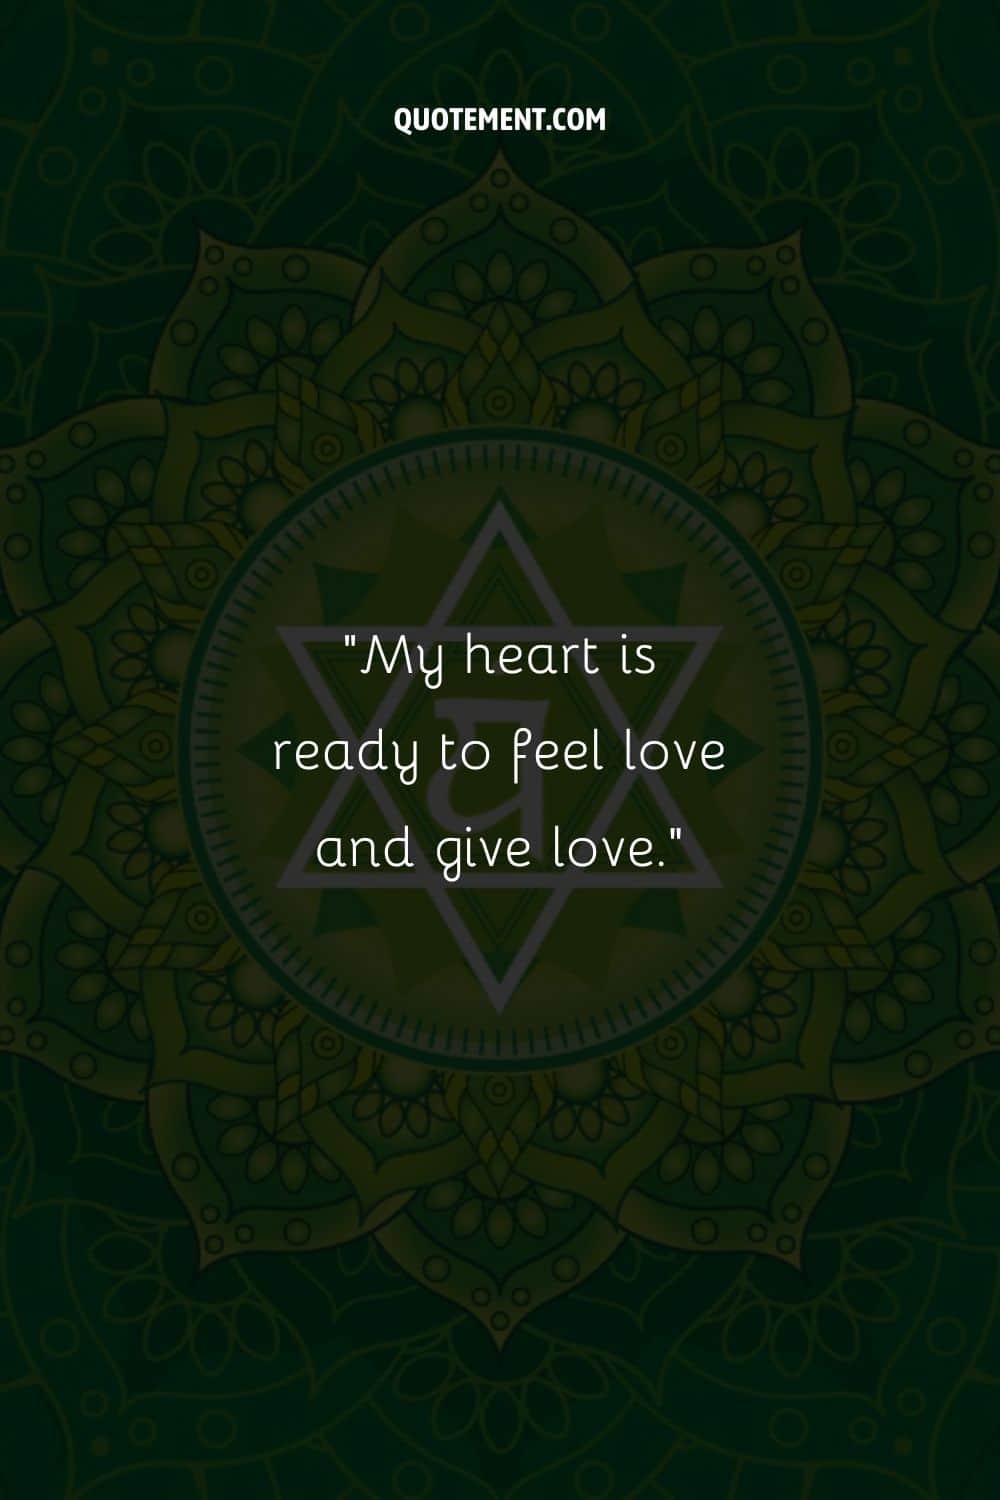 My heart is ready to feel love and give love